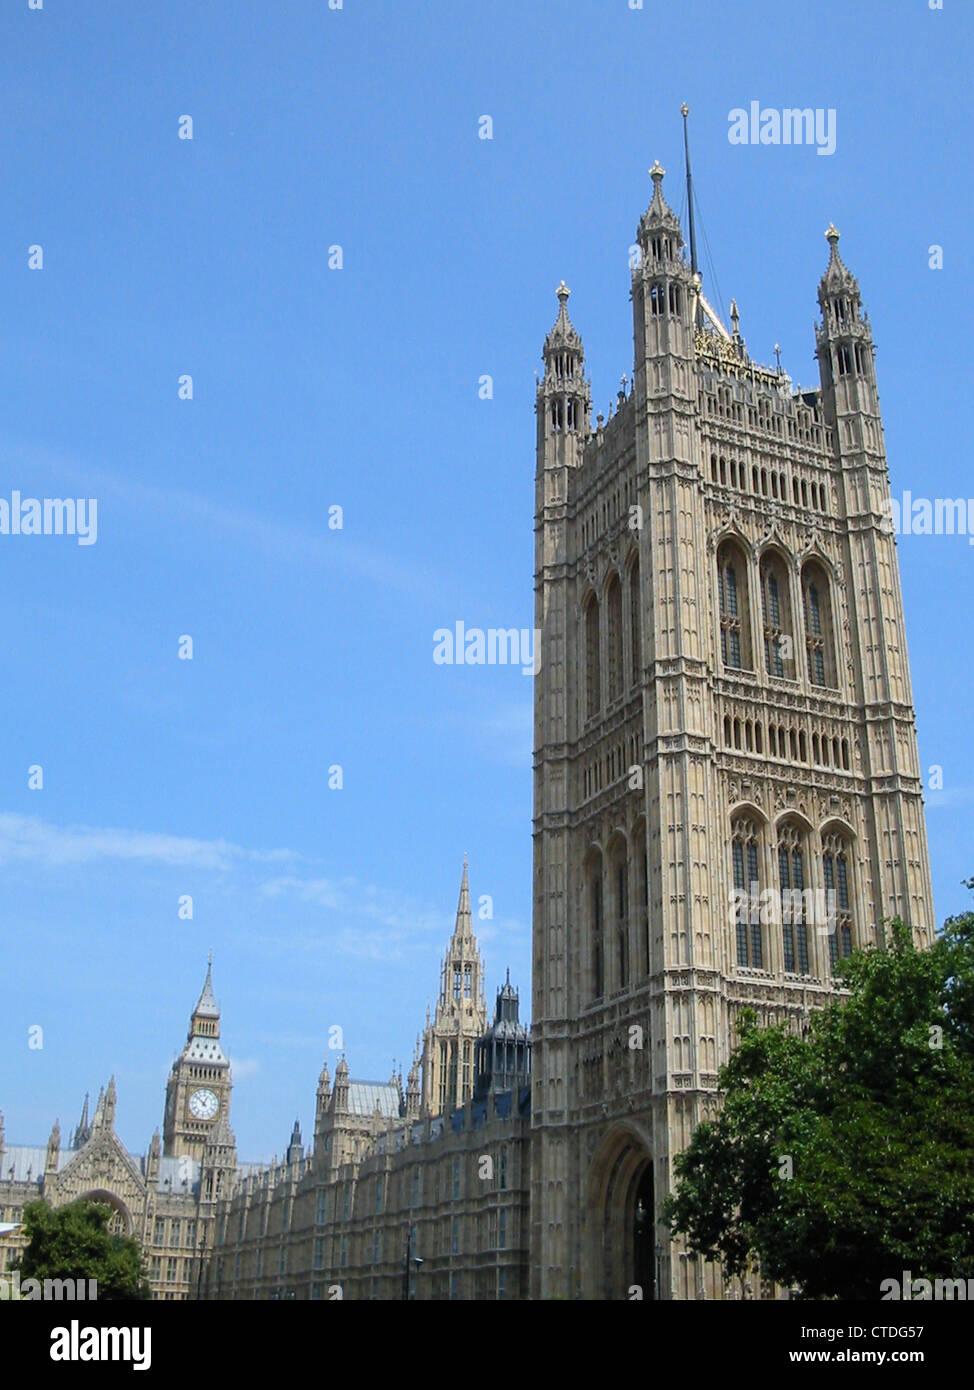 The Elizabeth Tower in the background housing Big Ben and the Victoria Tower in the foreground at the Palace of Westminster Stock Photo